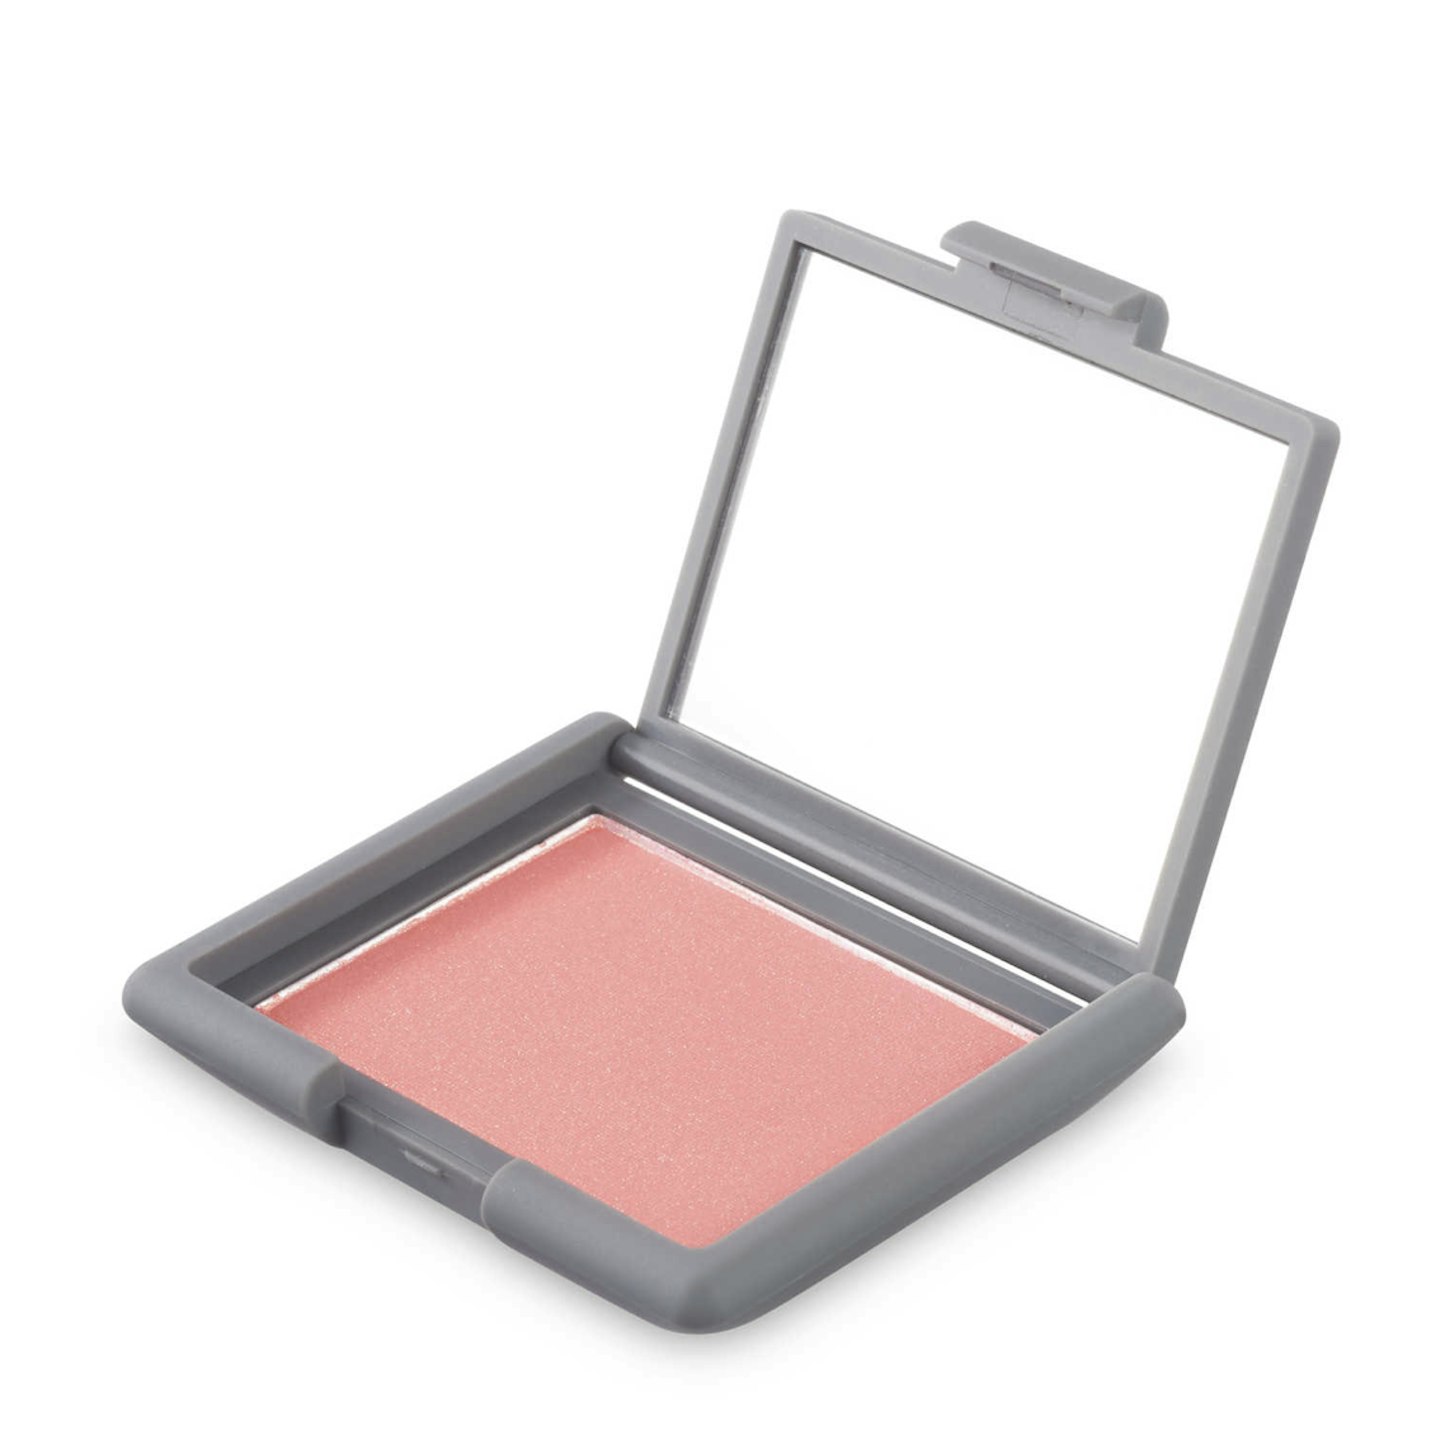 Lacura Candy Blusher